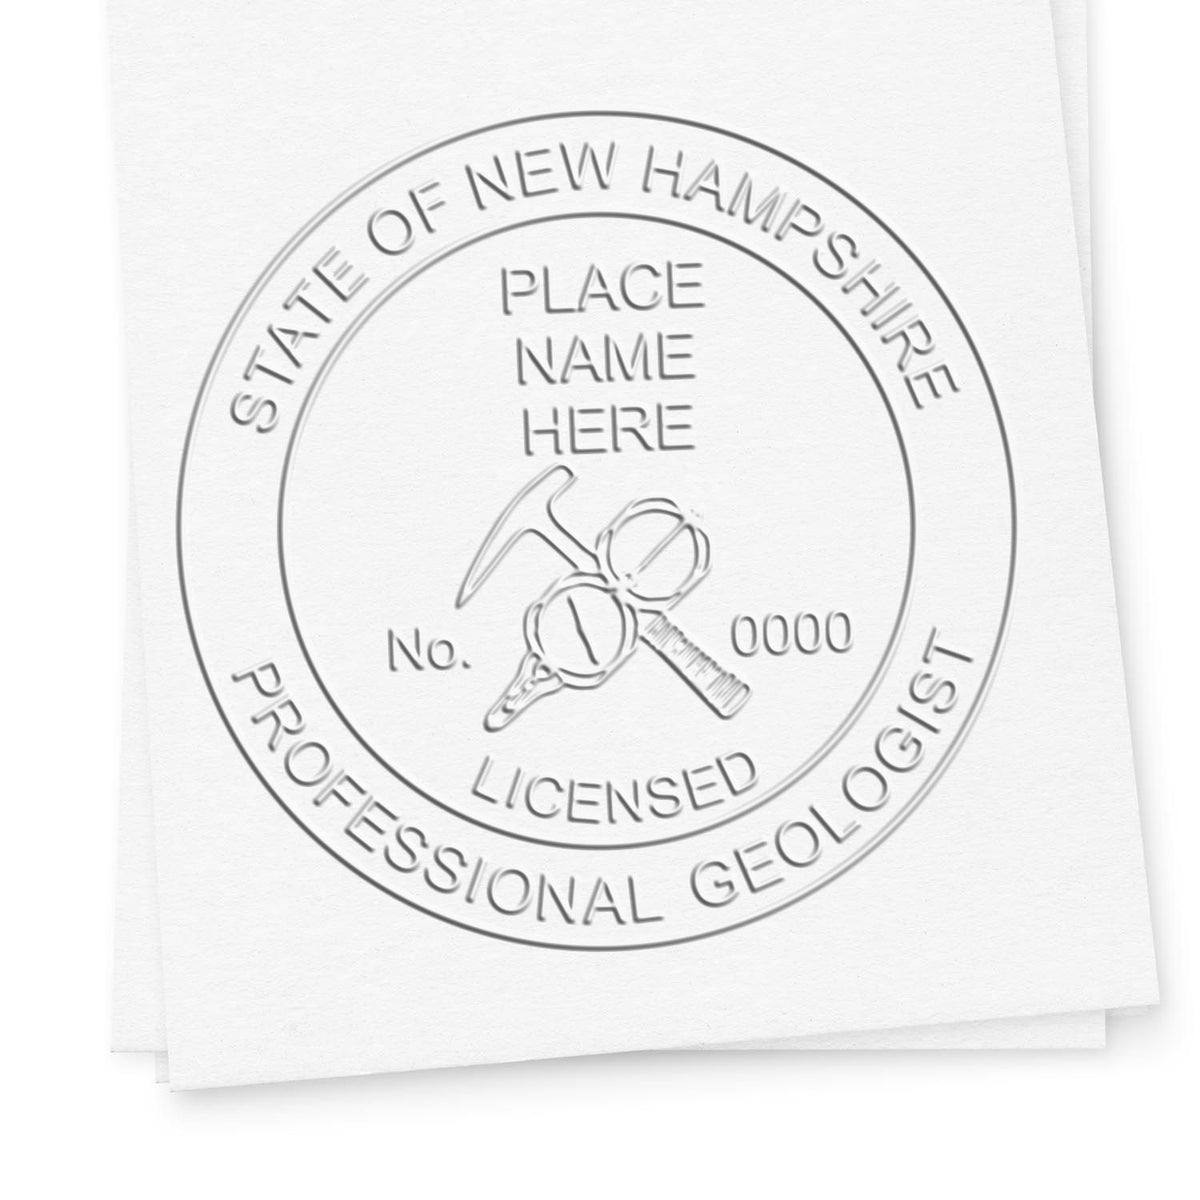 An alternative view of the State of New Hampshire Extended Long Reach Geologist Seal stamped on a sheet of paper showing the image in use